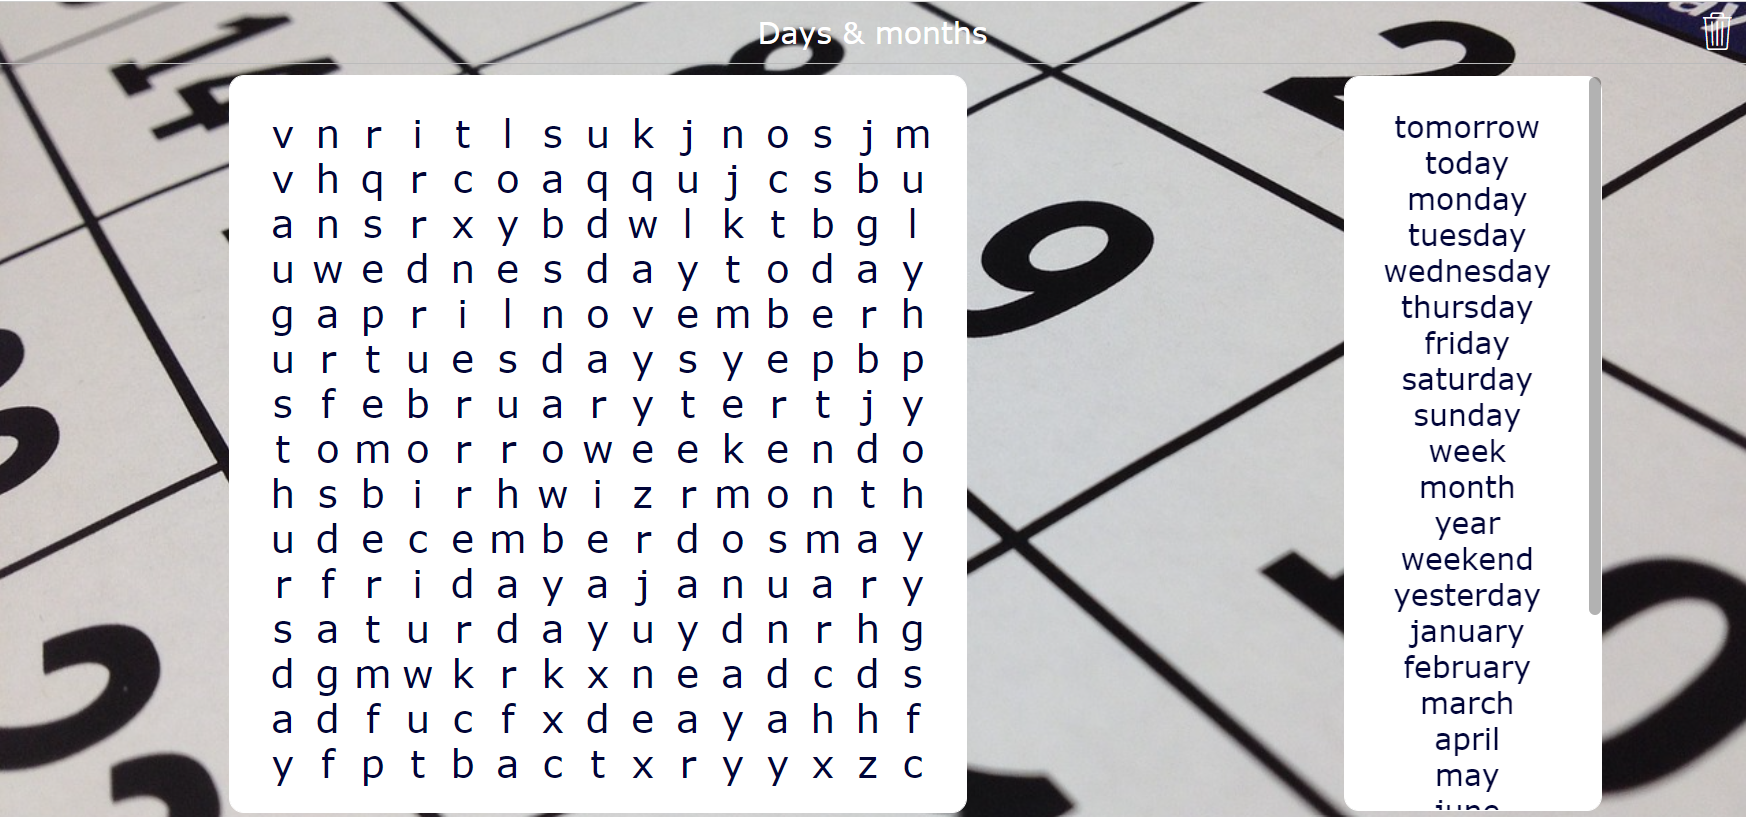 Language Word Search Puzzle - Days and months